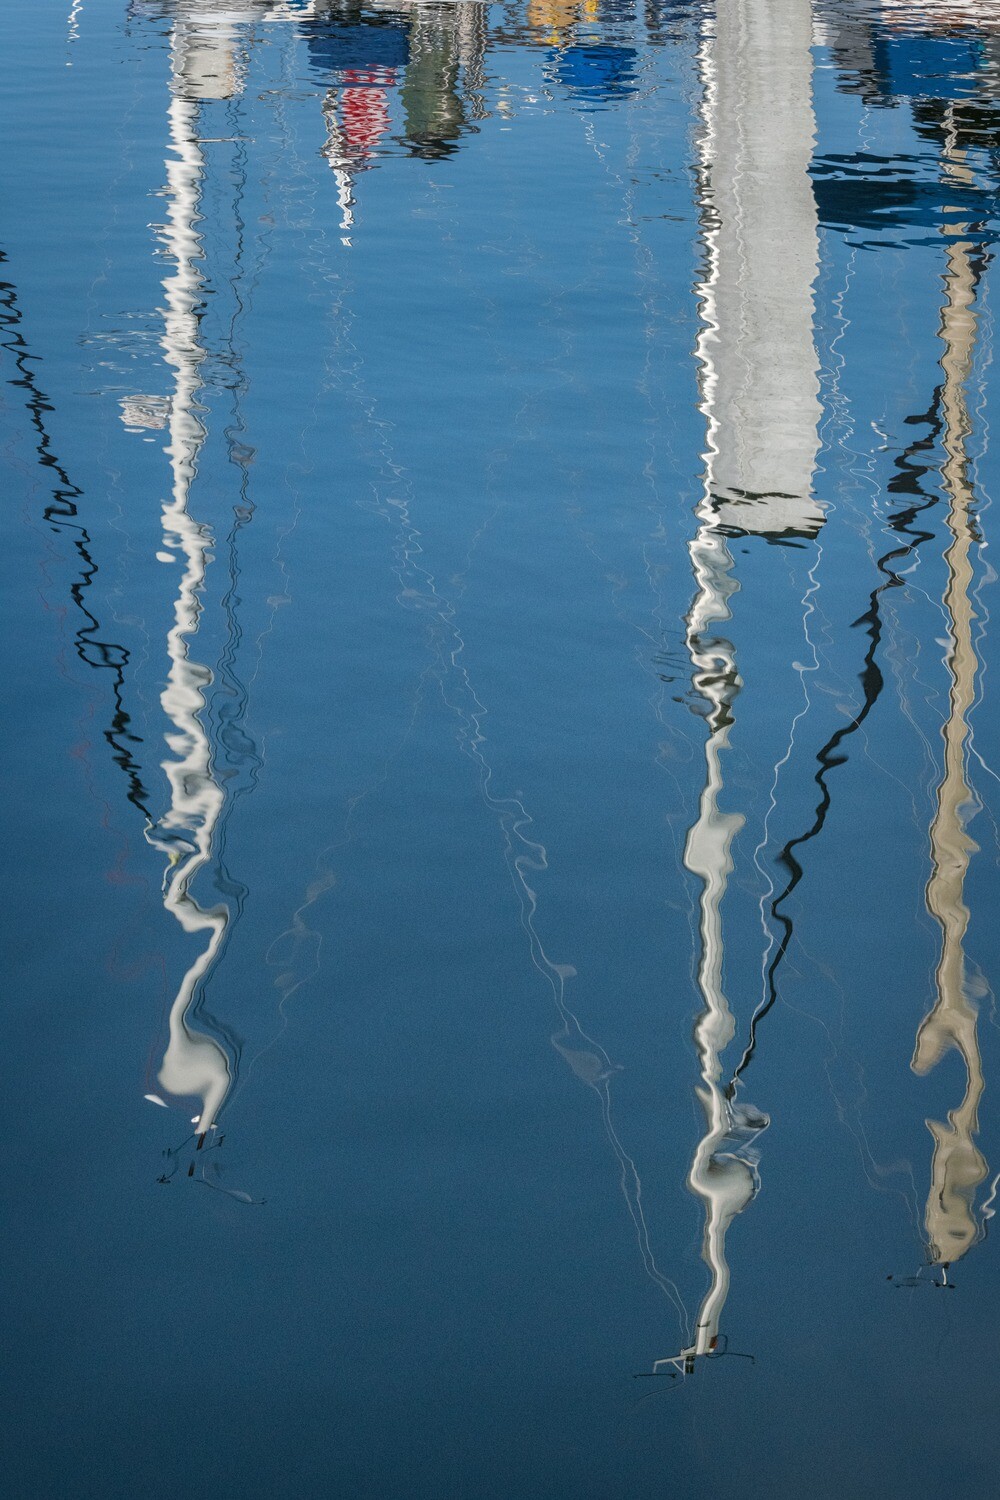 Dock Reflections